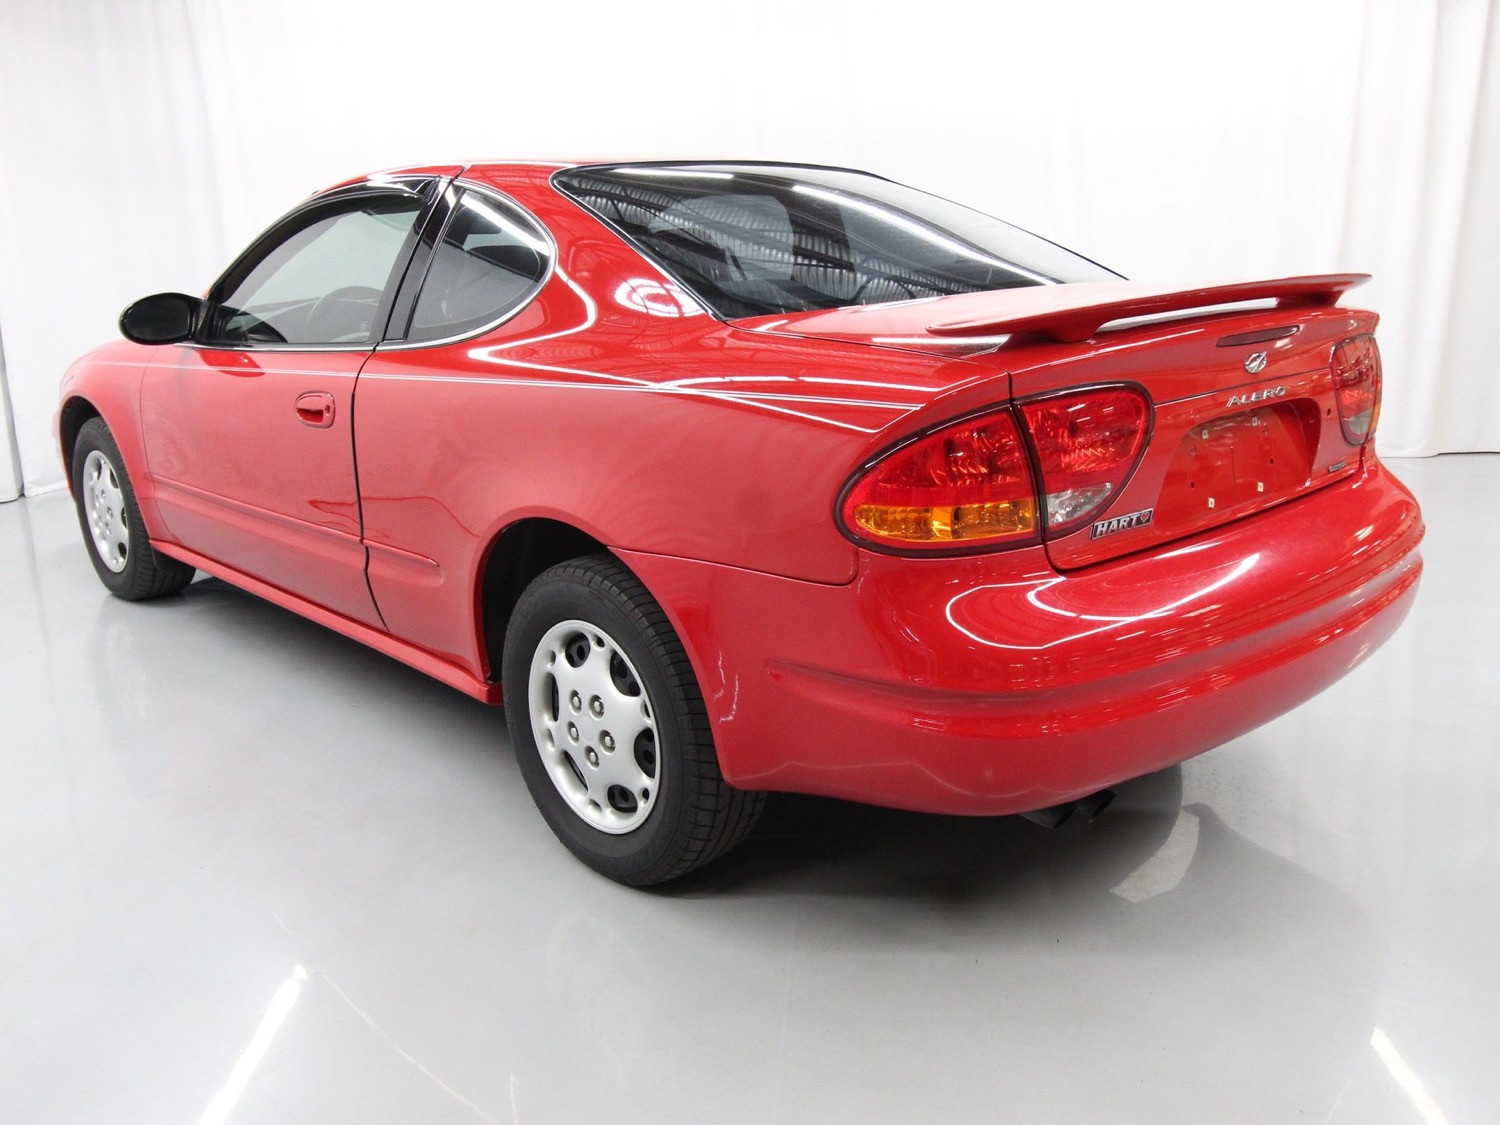 2000 Oldsmobile Alero – red coupe – for sale – Duncan Imports and Classics  005 | GM Authority